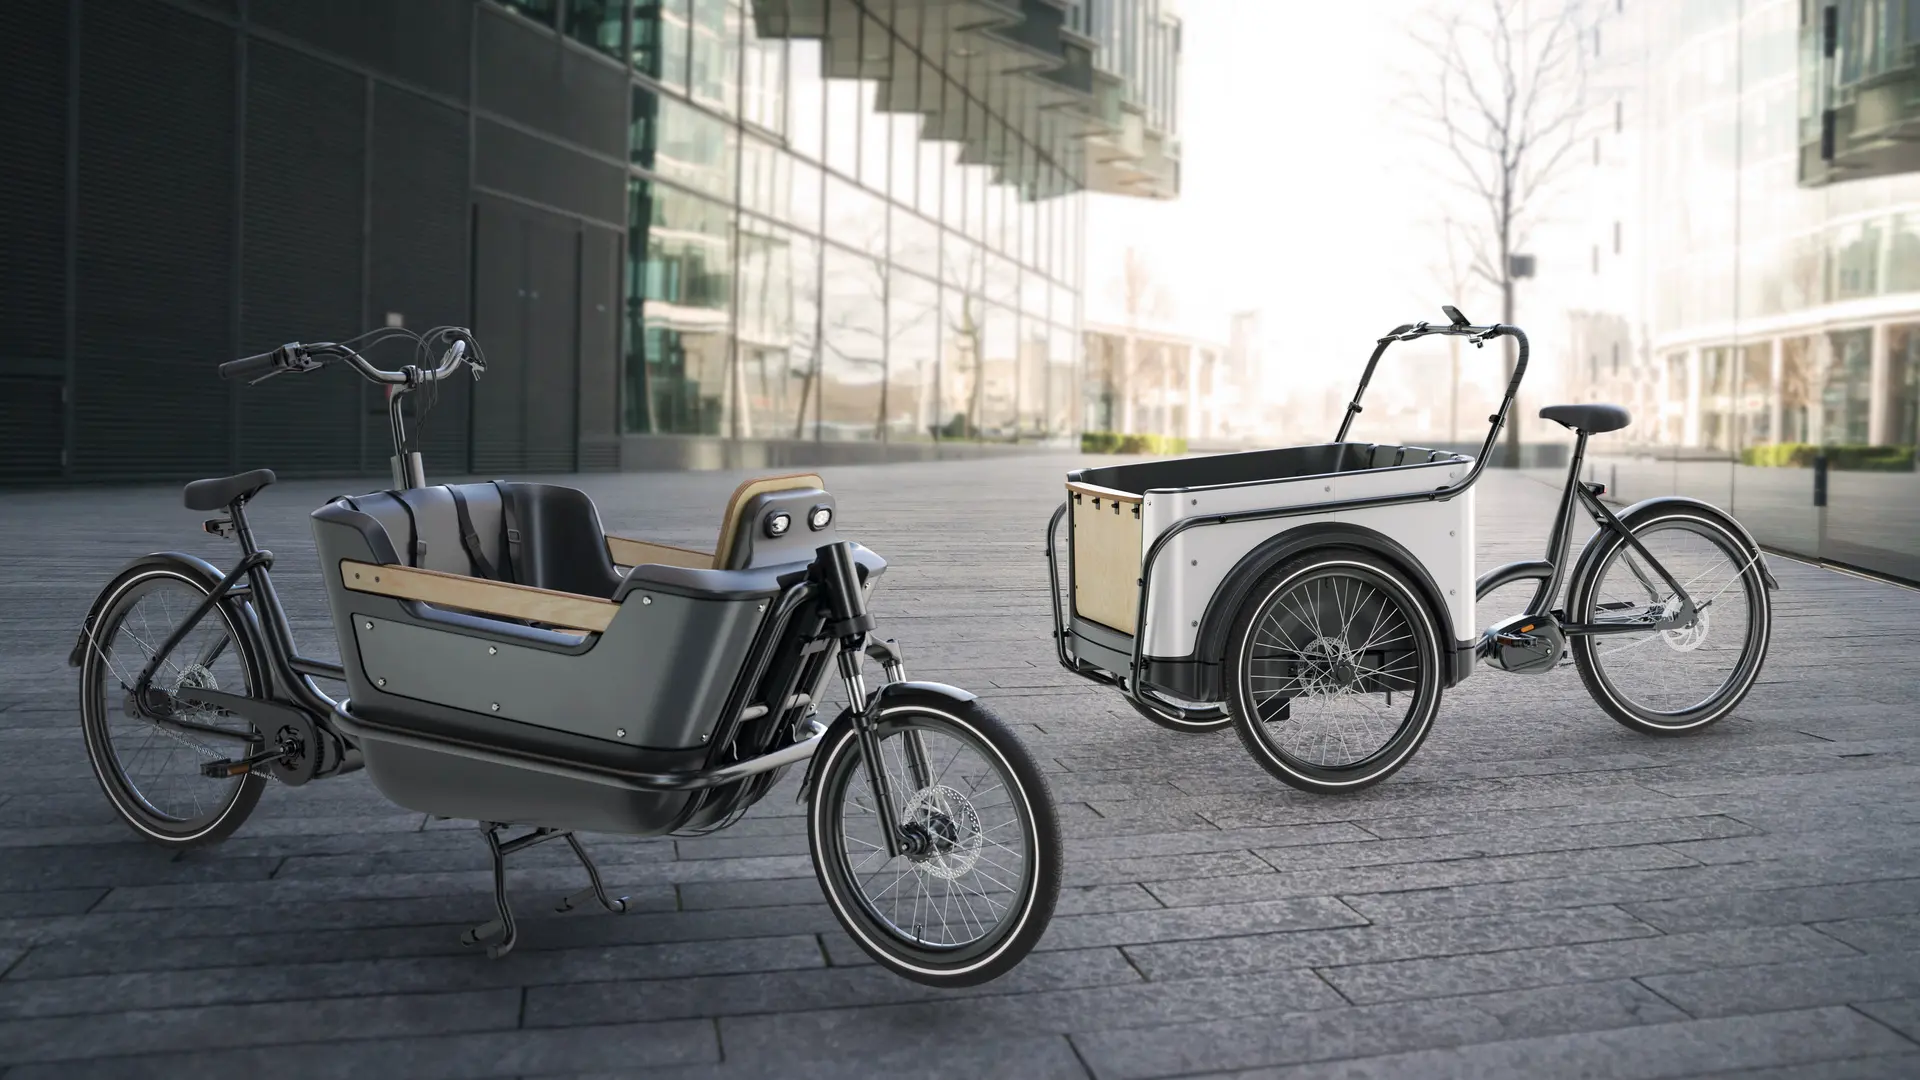 Our latest and greatest cargo bikes have arrived!